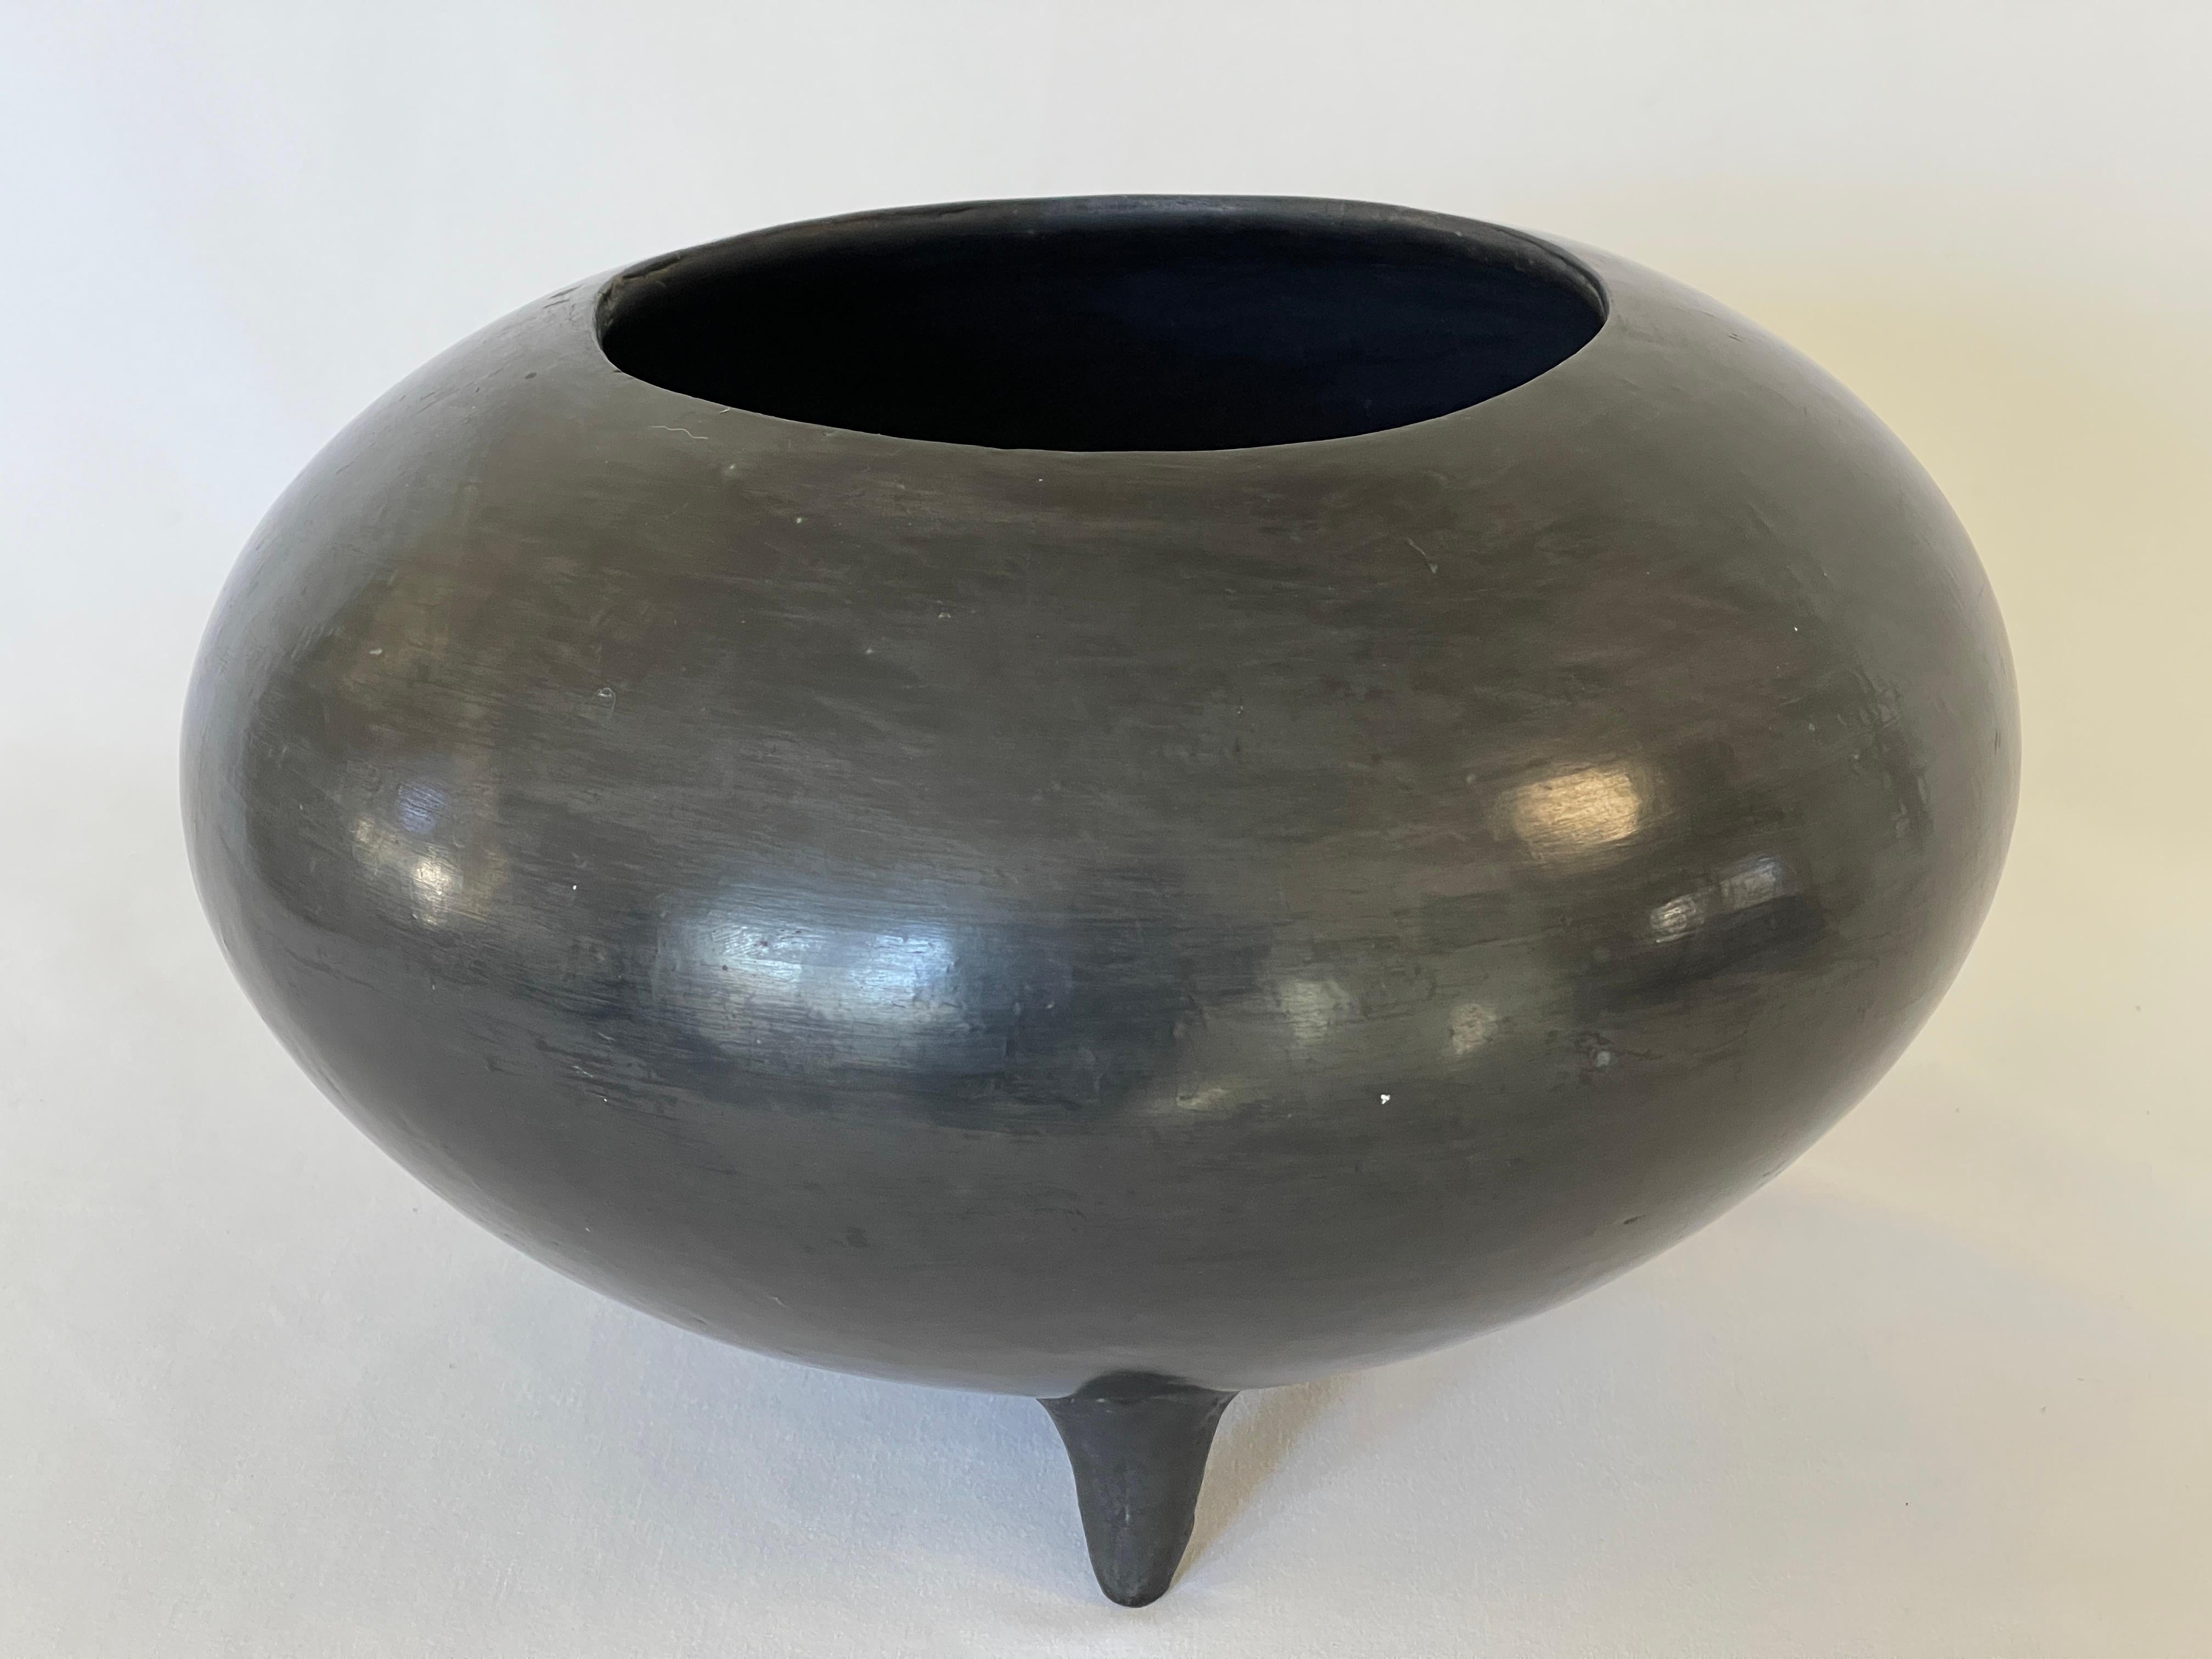 Mexican Mid century hand crafted burnished black pottery vessel raised on three graceful legs. One small hole present at bottom, as pictured.
Oaxaca, Mexico, c. 1950's.